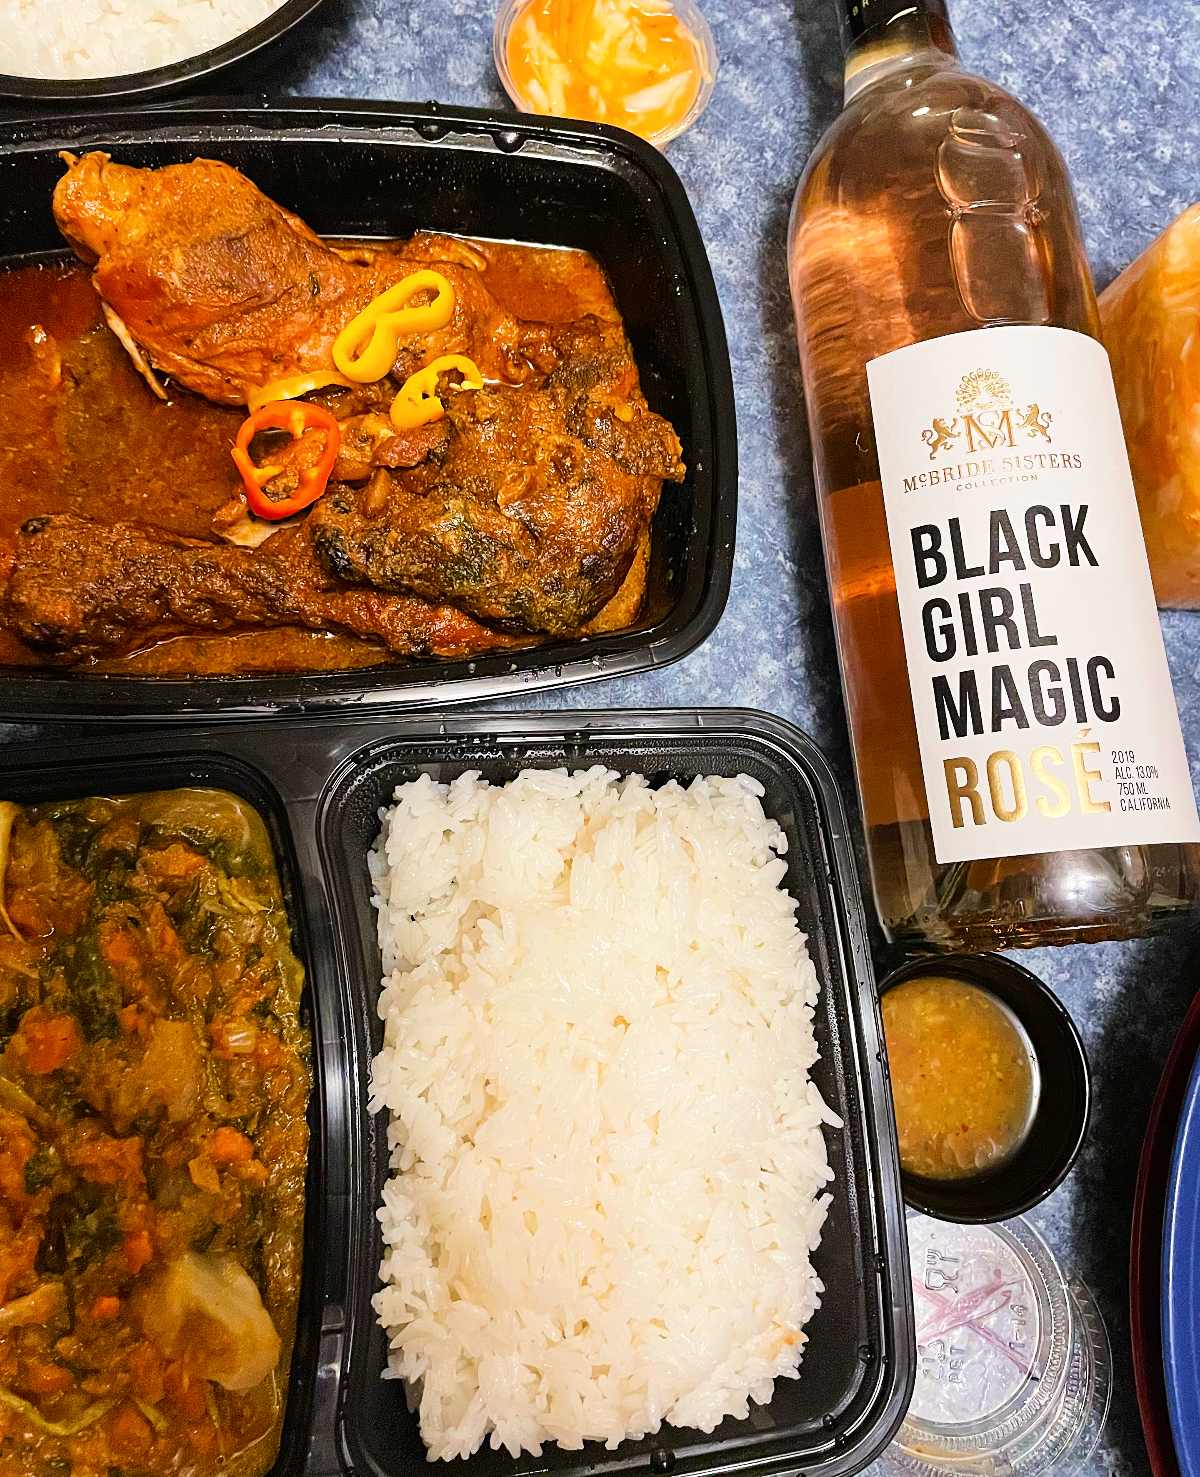 Haitian chicken, rice, and vegetables in takeout containers alongside a bottle of Black Girl Magic Rosé wine.